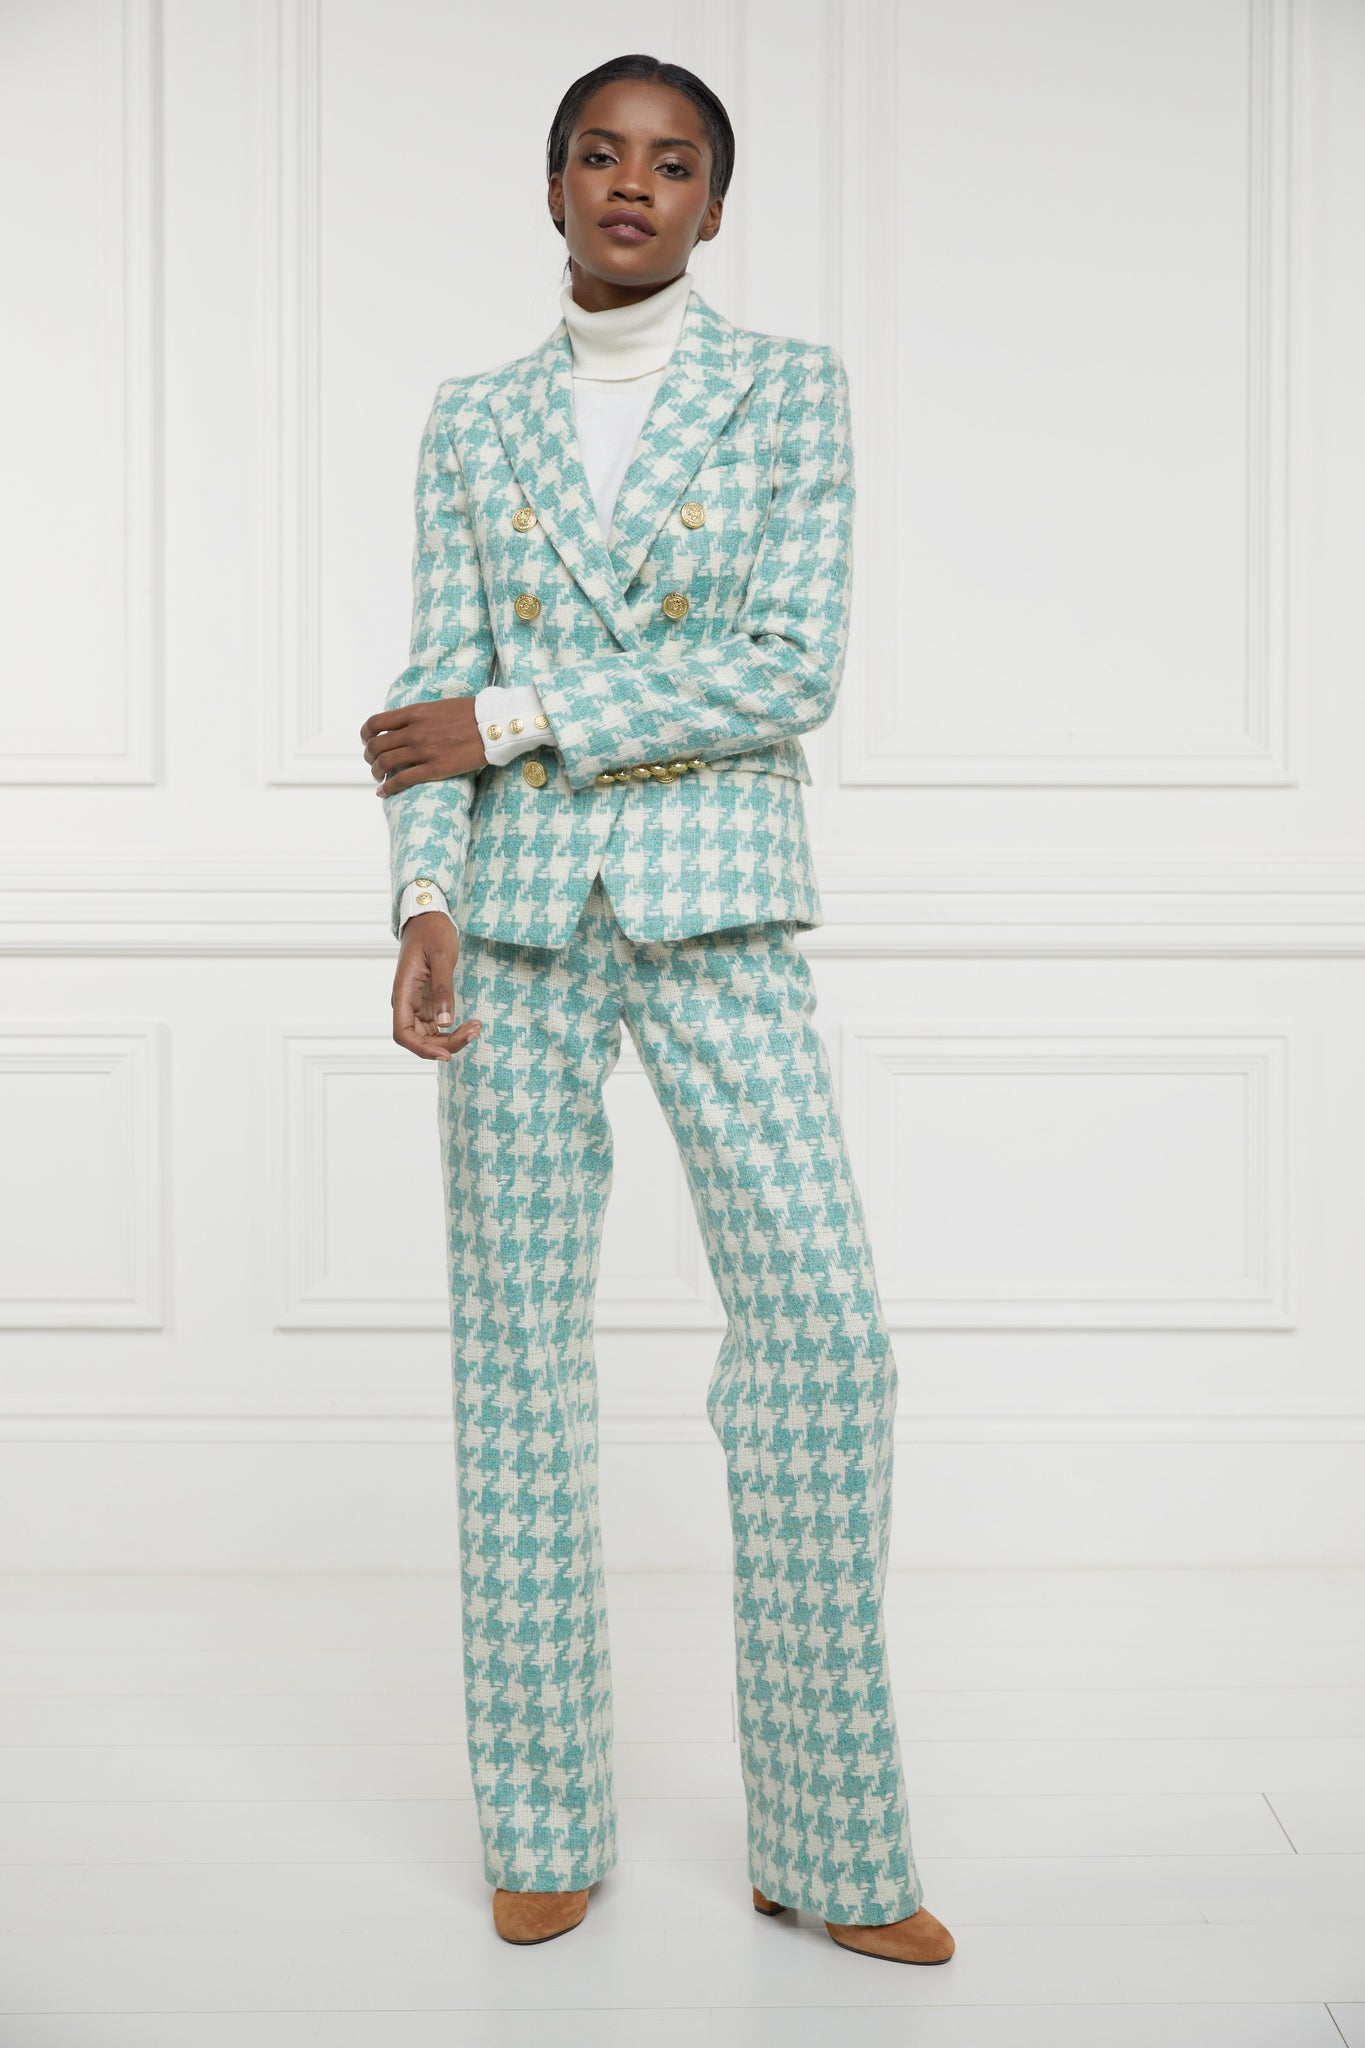 The Large Scale Teal Houndstooth Suit